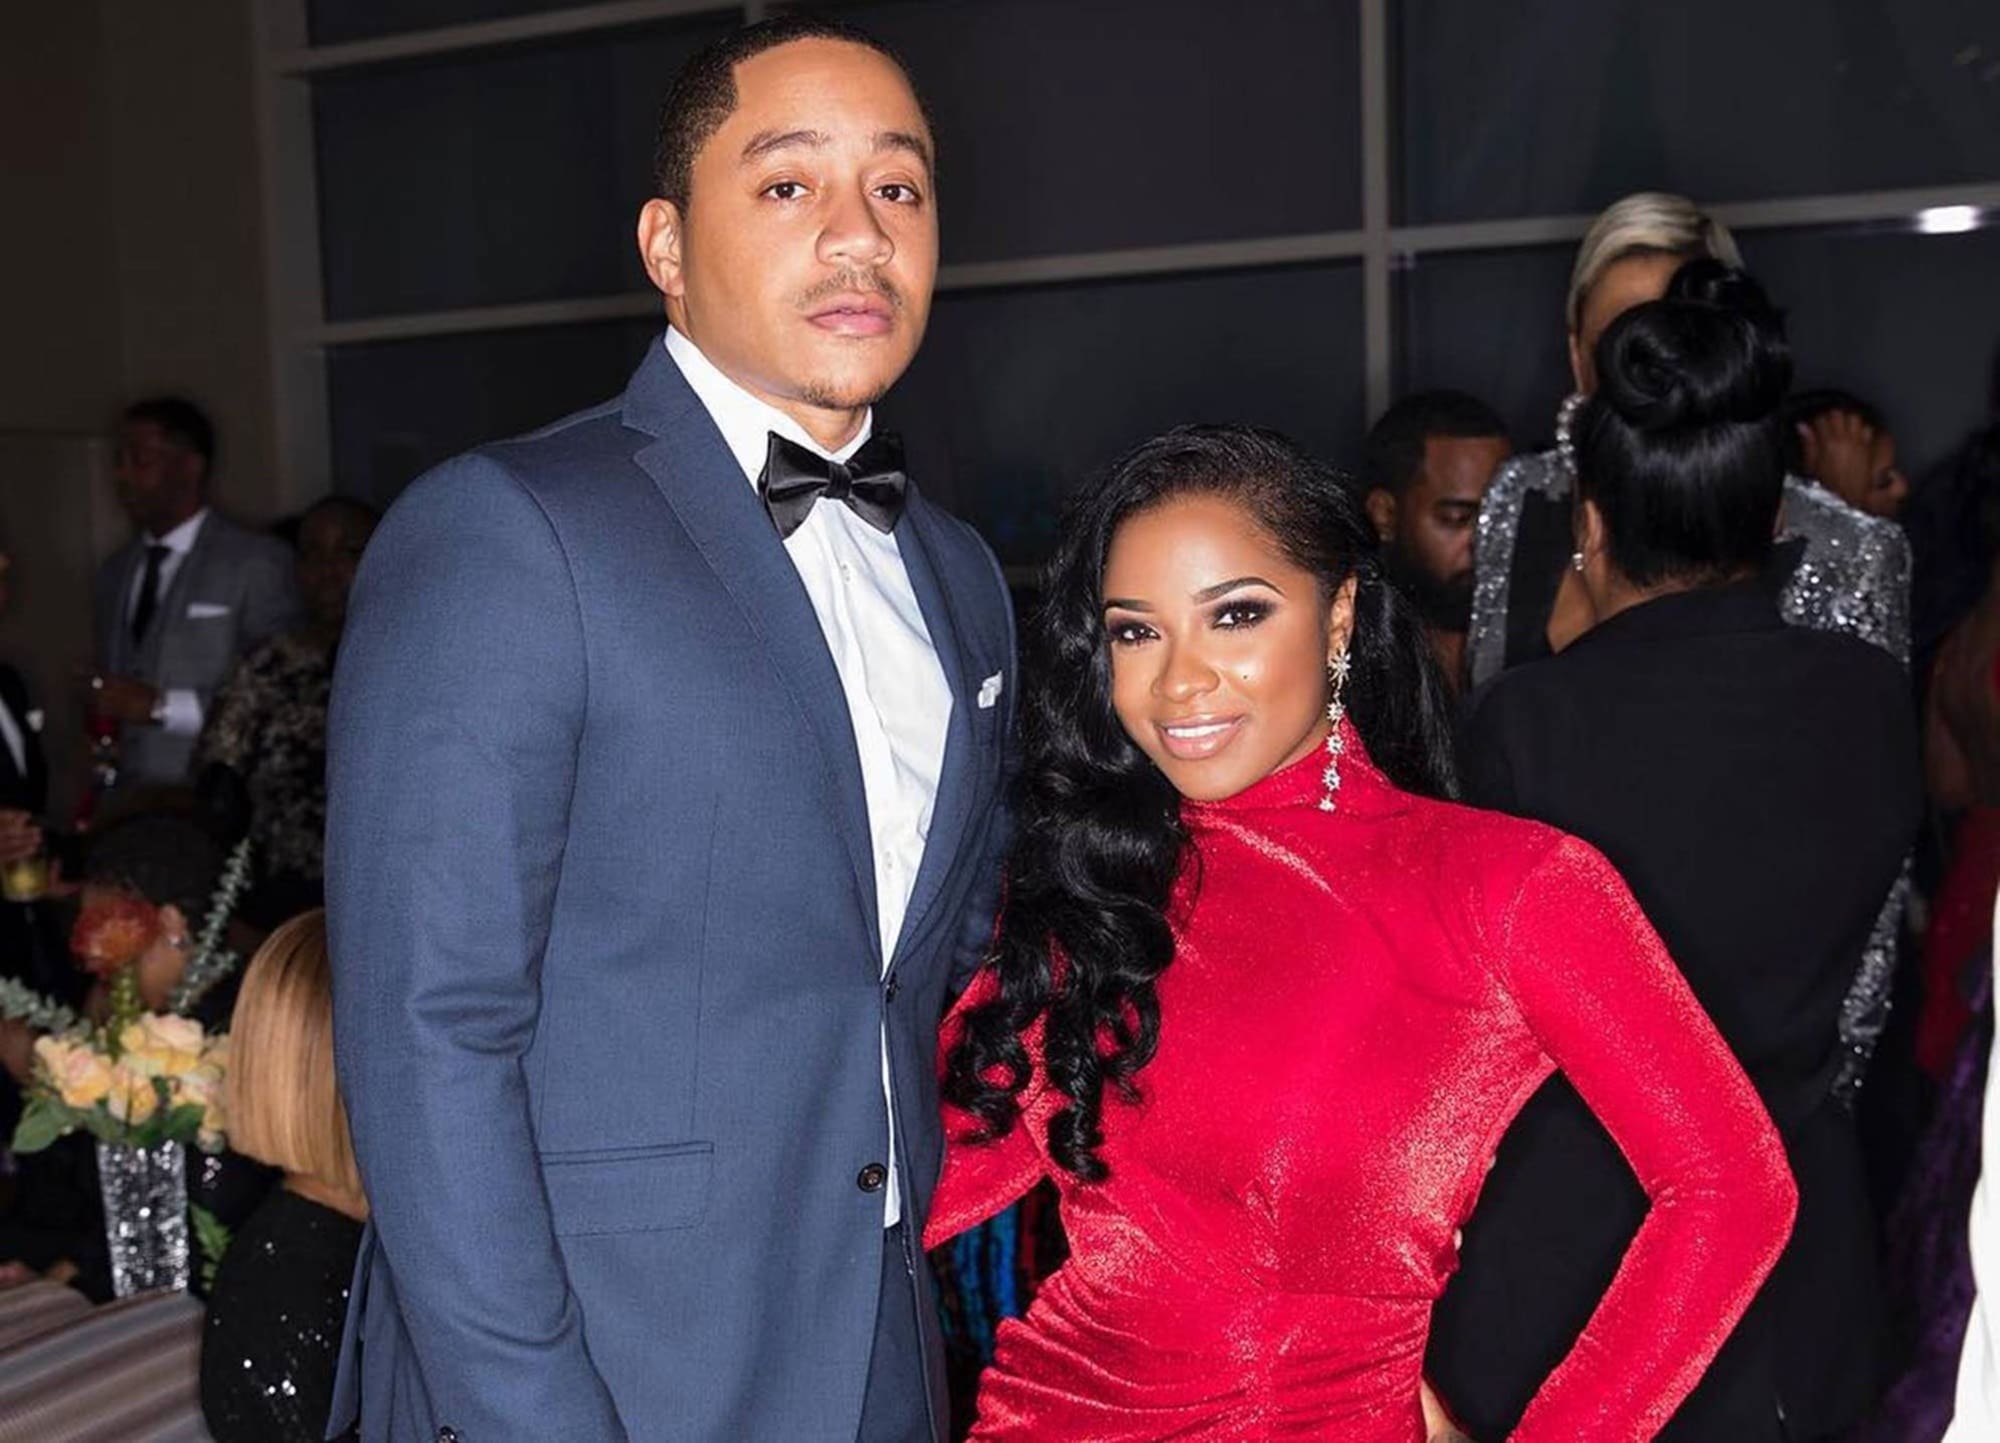 Toya Johnson Shares A Photo With Robert Rushing In Which Shes